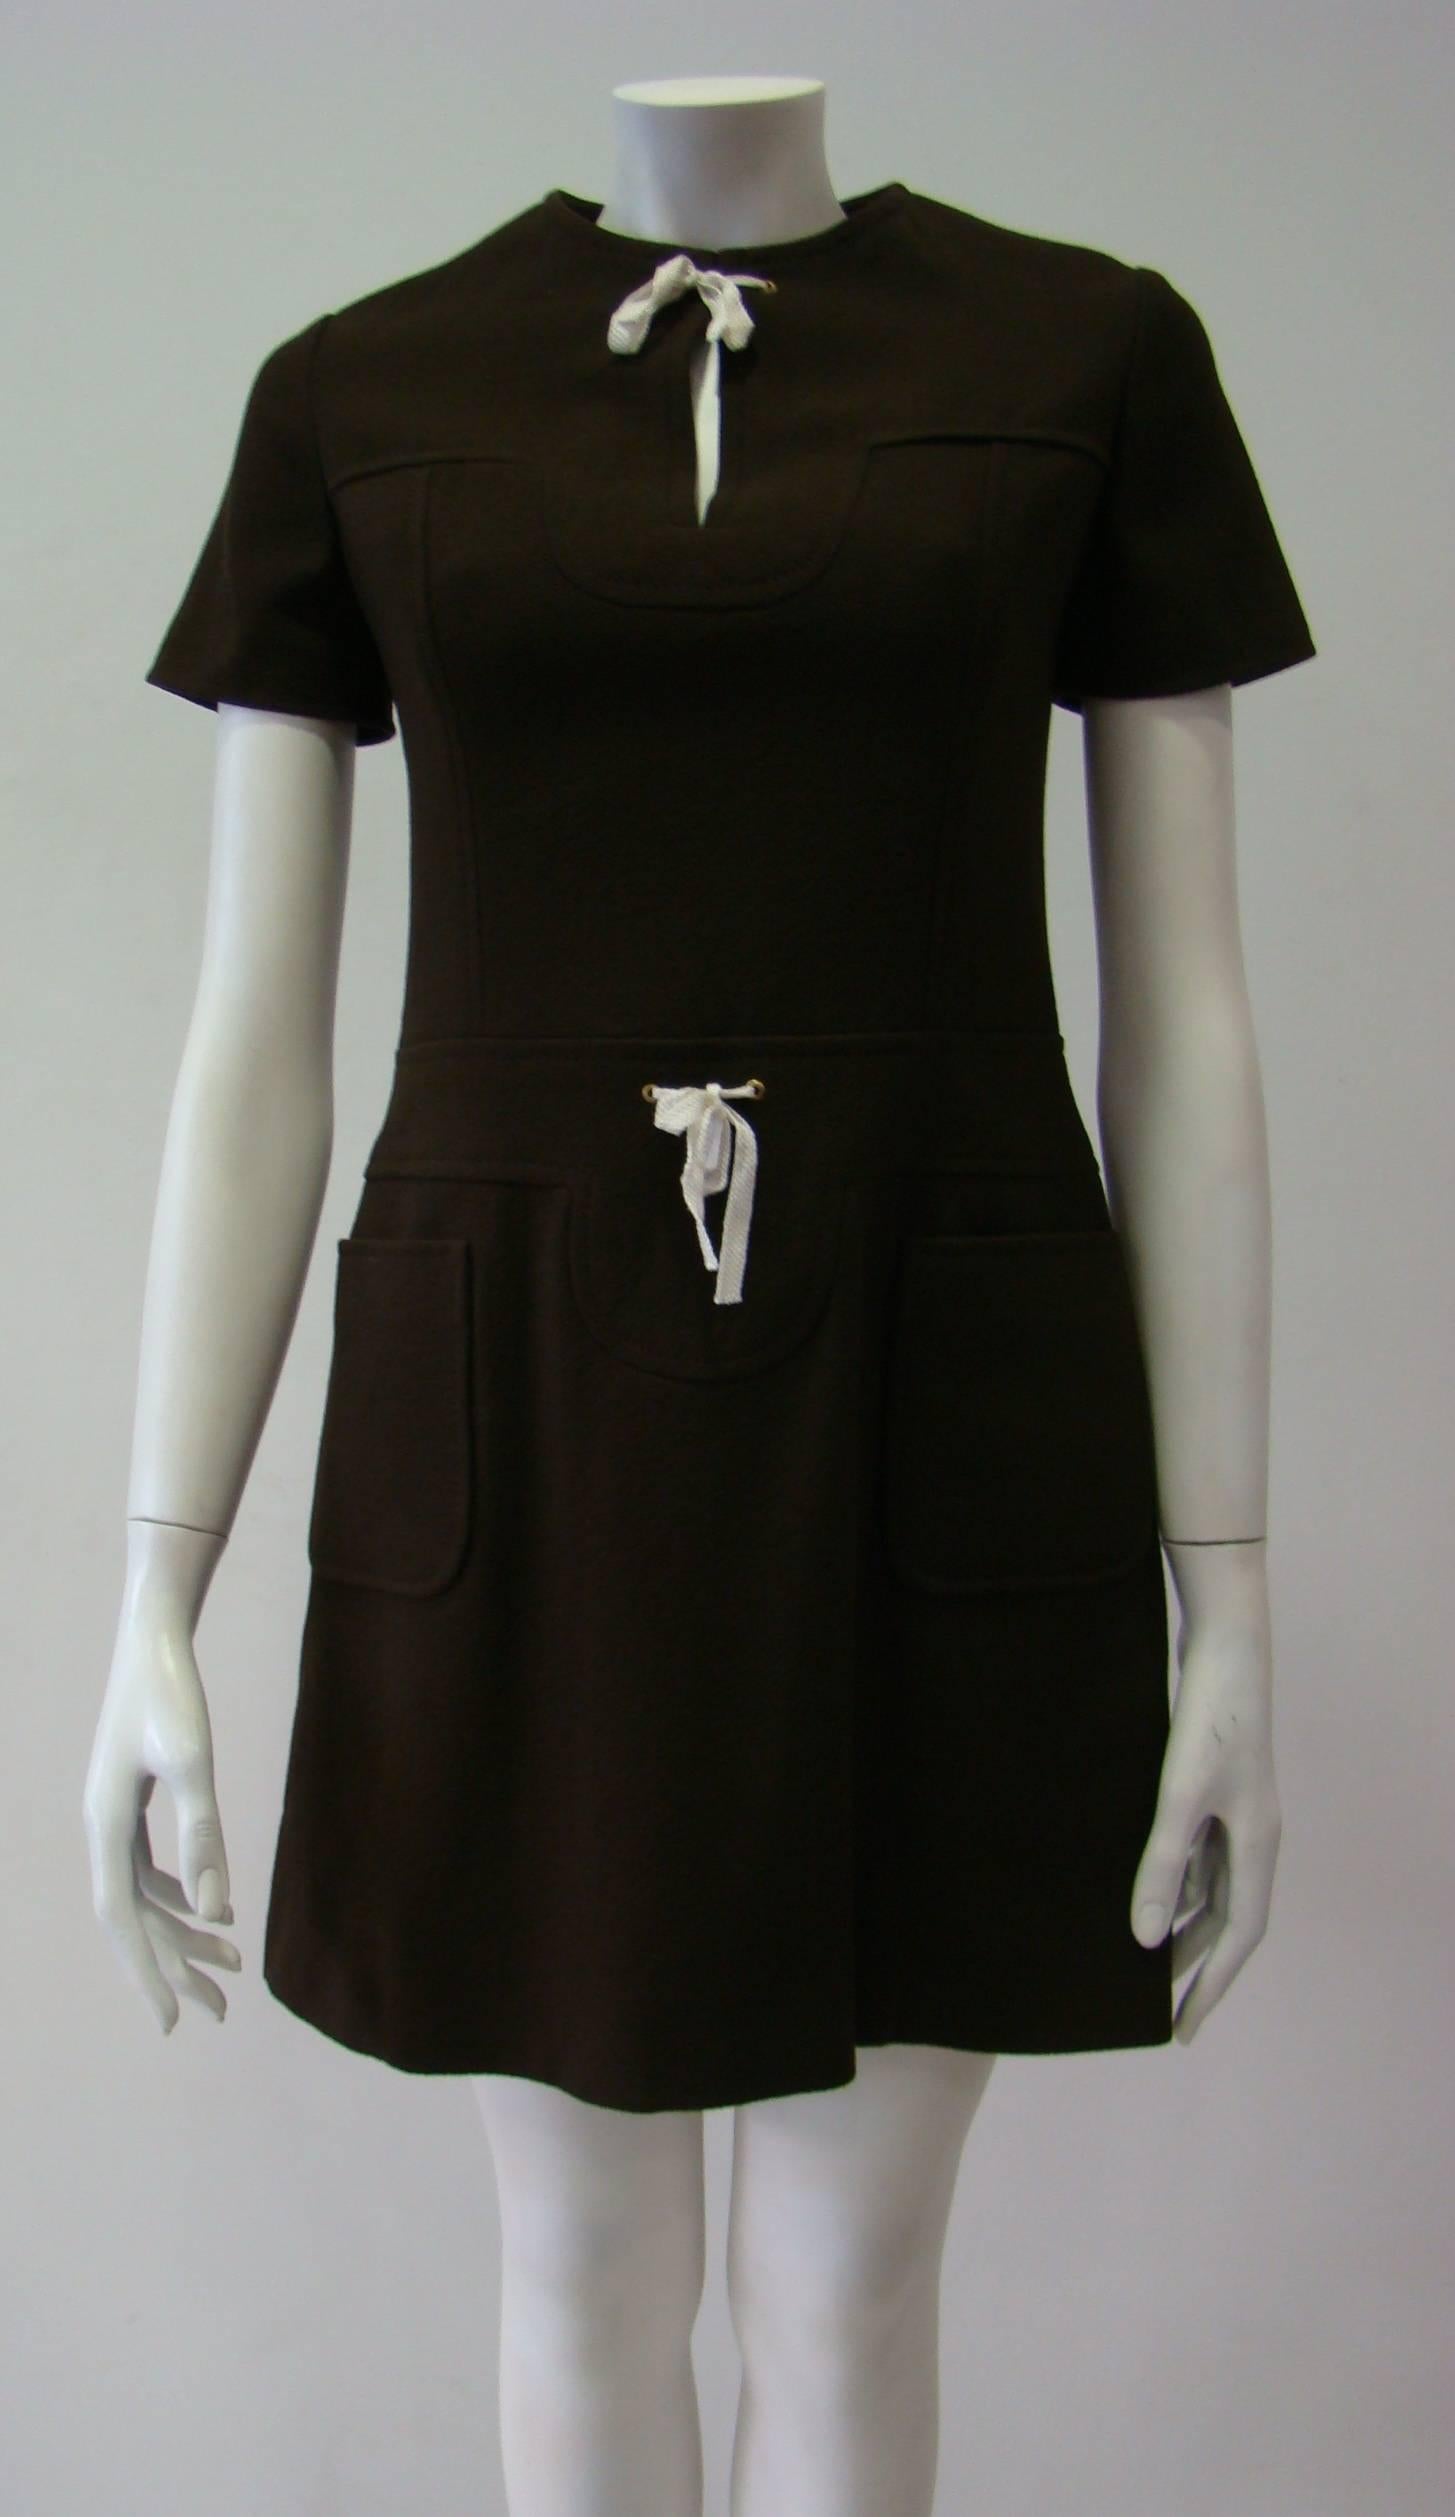 100% Wool Dress With A Simple Design Featuring Short Sleeves, A Stylish Lace Splice Neck And Waist, Two Small Front Pockets And A Back Zip Fastening. Unlined And Not Tight Mini Dress.